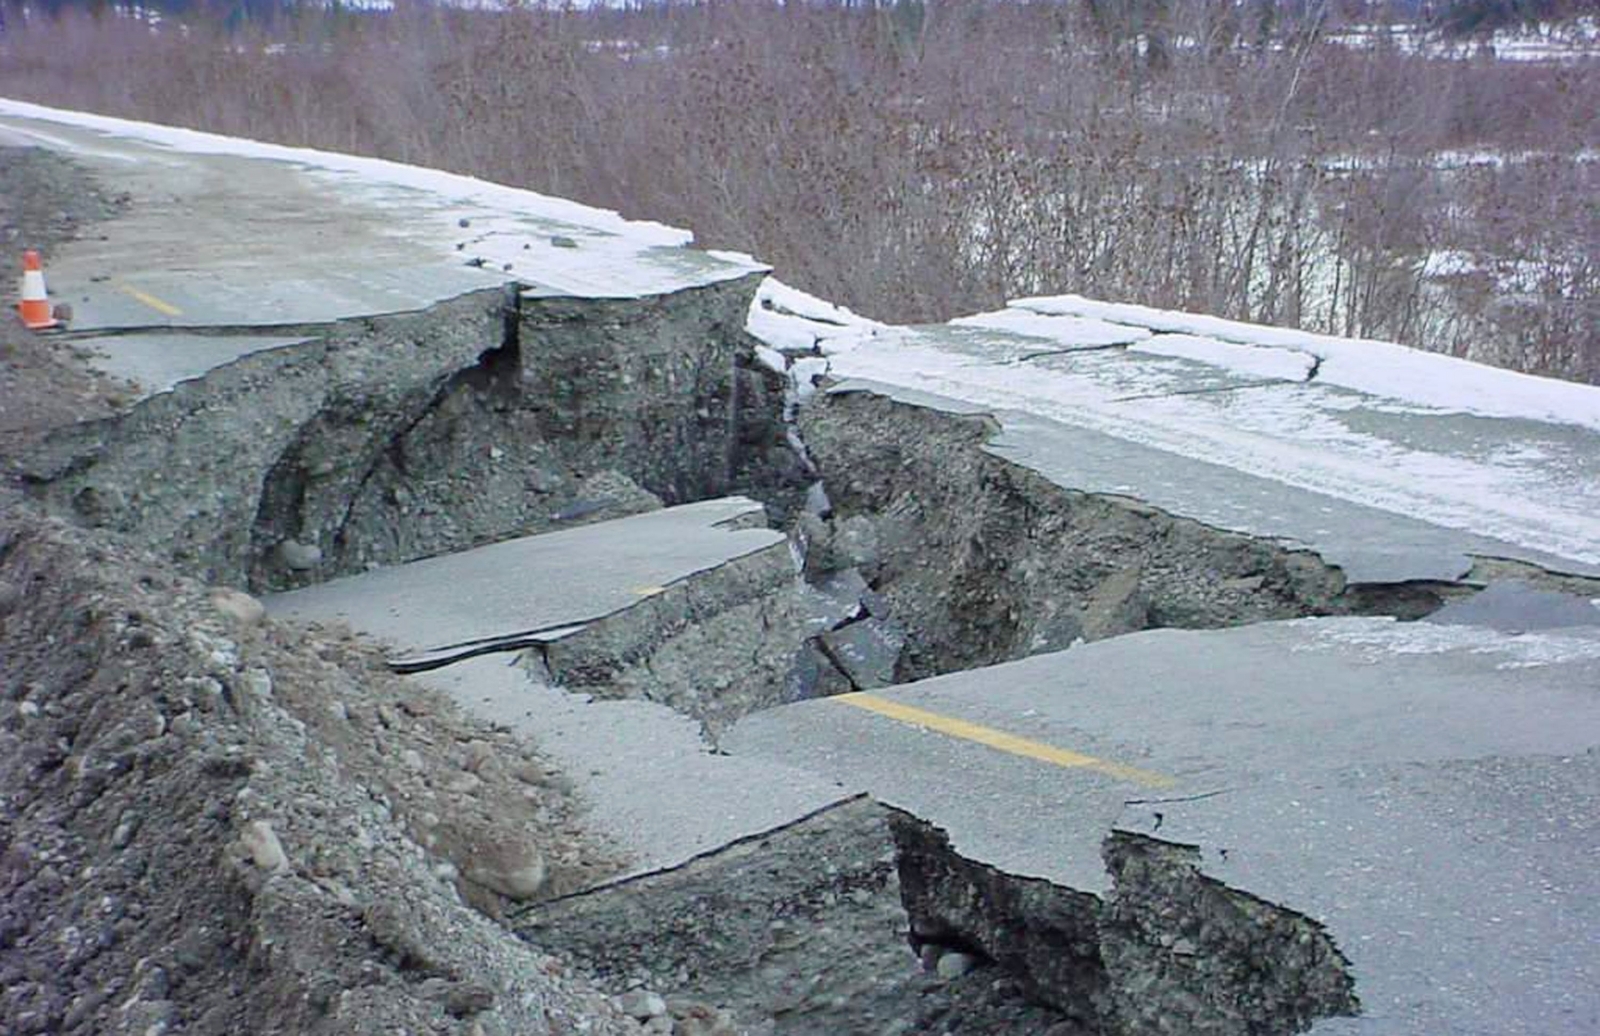 Alaska is at high tsunami risk due to structure discovered ...